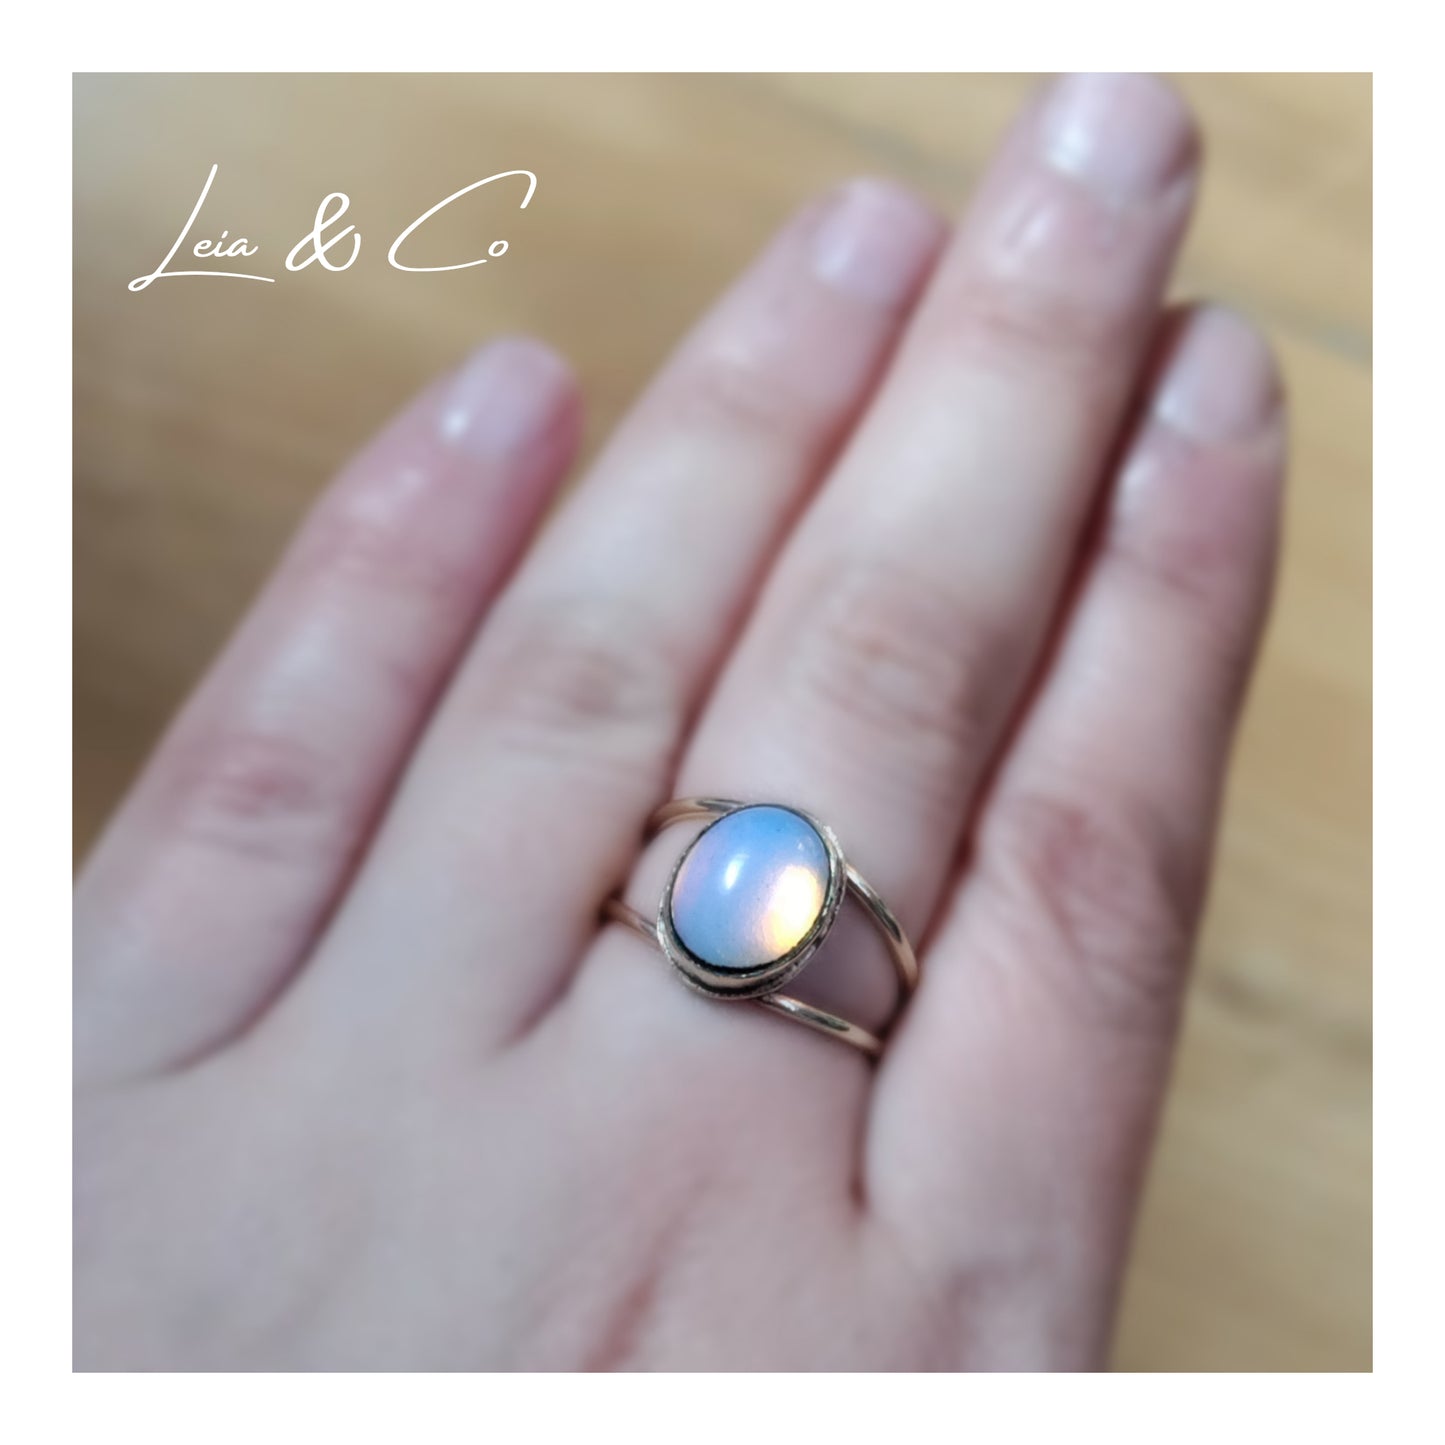 Double band ring in brass with opalite stone LEIA&CO